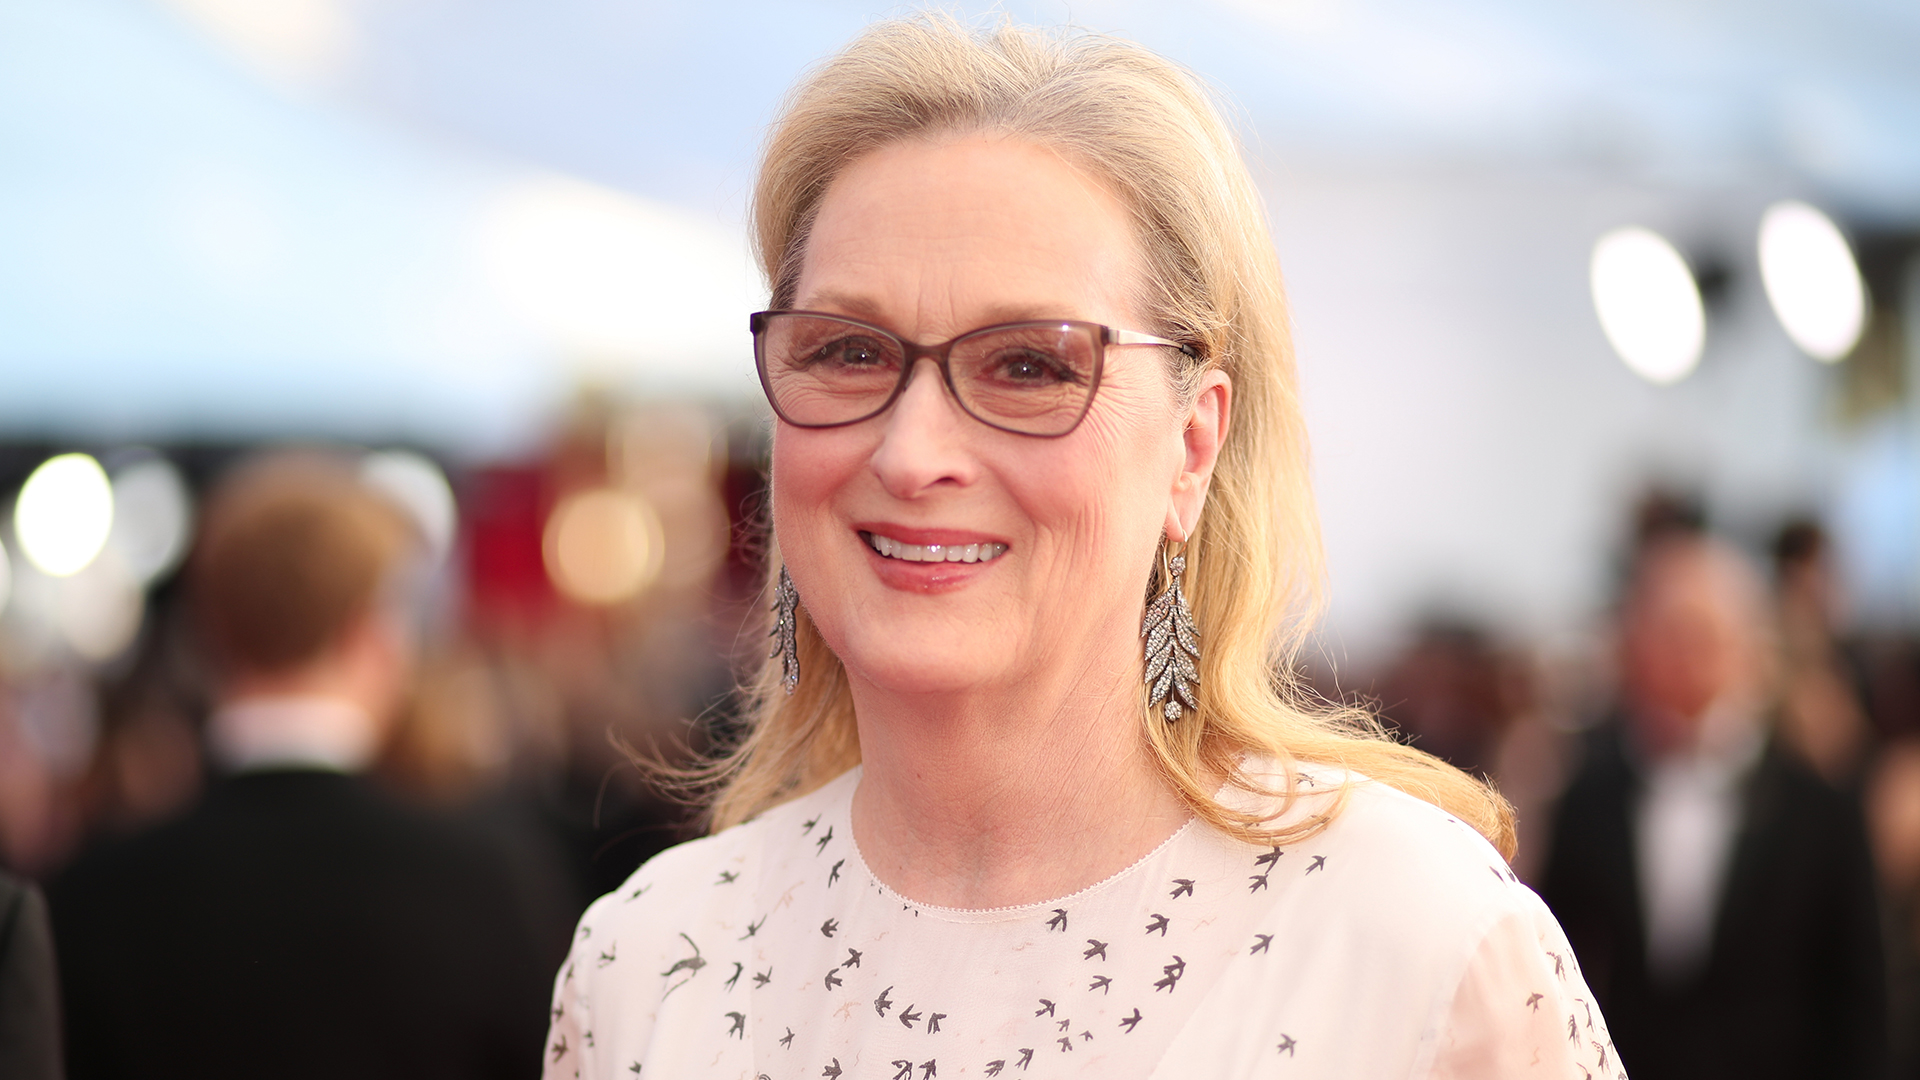 4. "Meryl Streep" - The actress who plays the main character with blonde hair in "Mamma Mia!" - wide 11